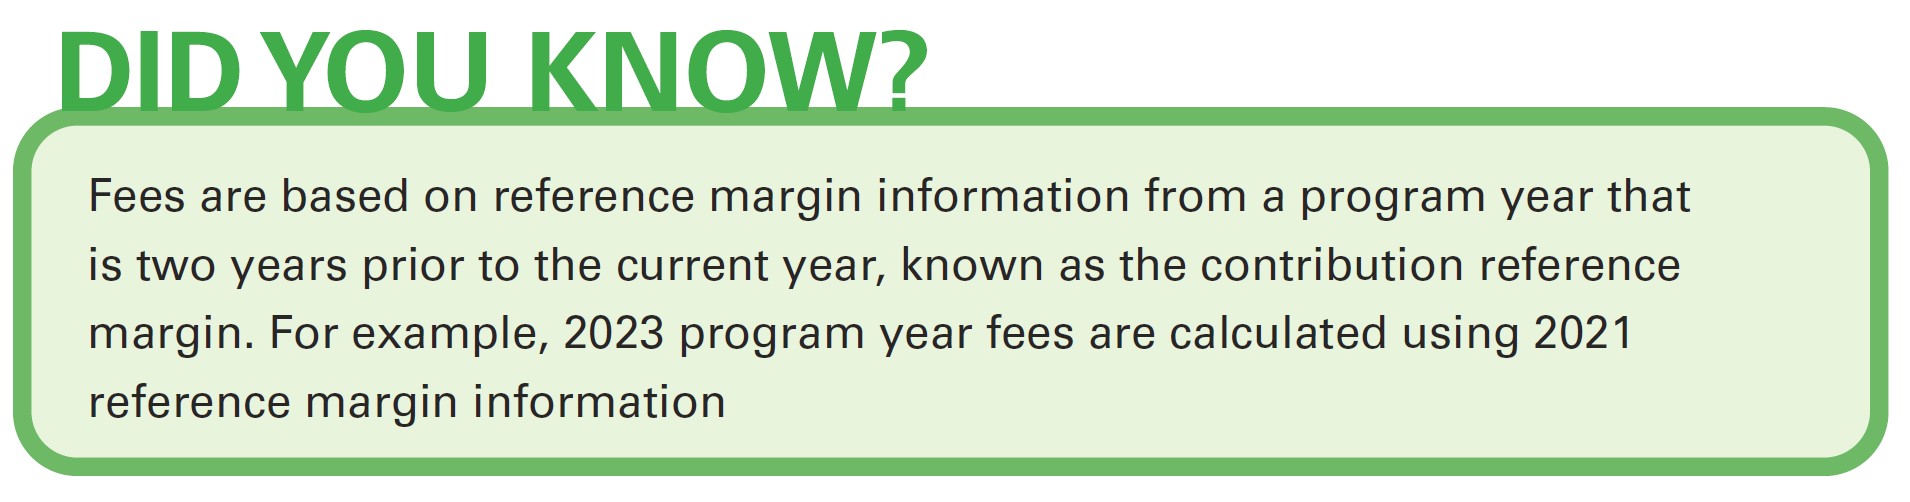 Did you know? Fees are based on reference margin information from a program year that is two years prior to the current year, known as the contribution reference margin. For example, 2023 program year fees are calculated using 2021 reference margin information.